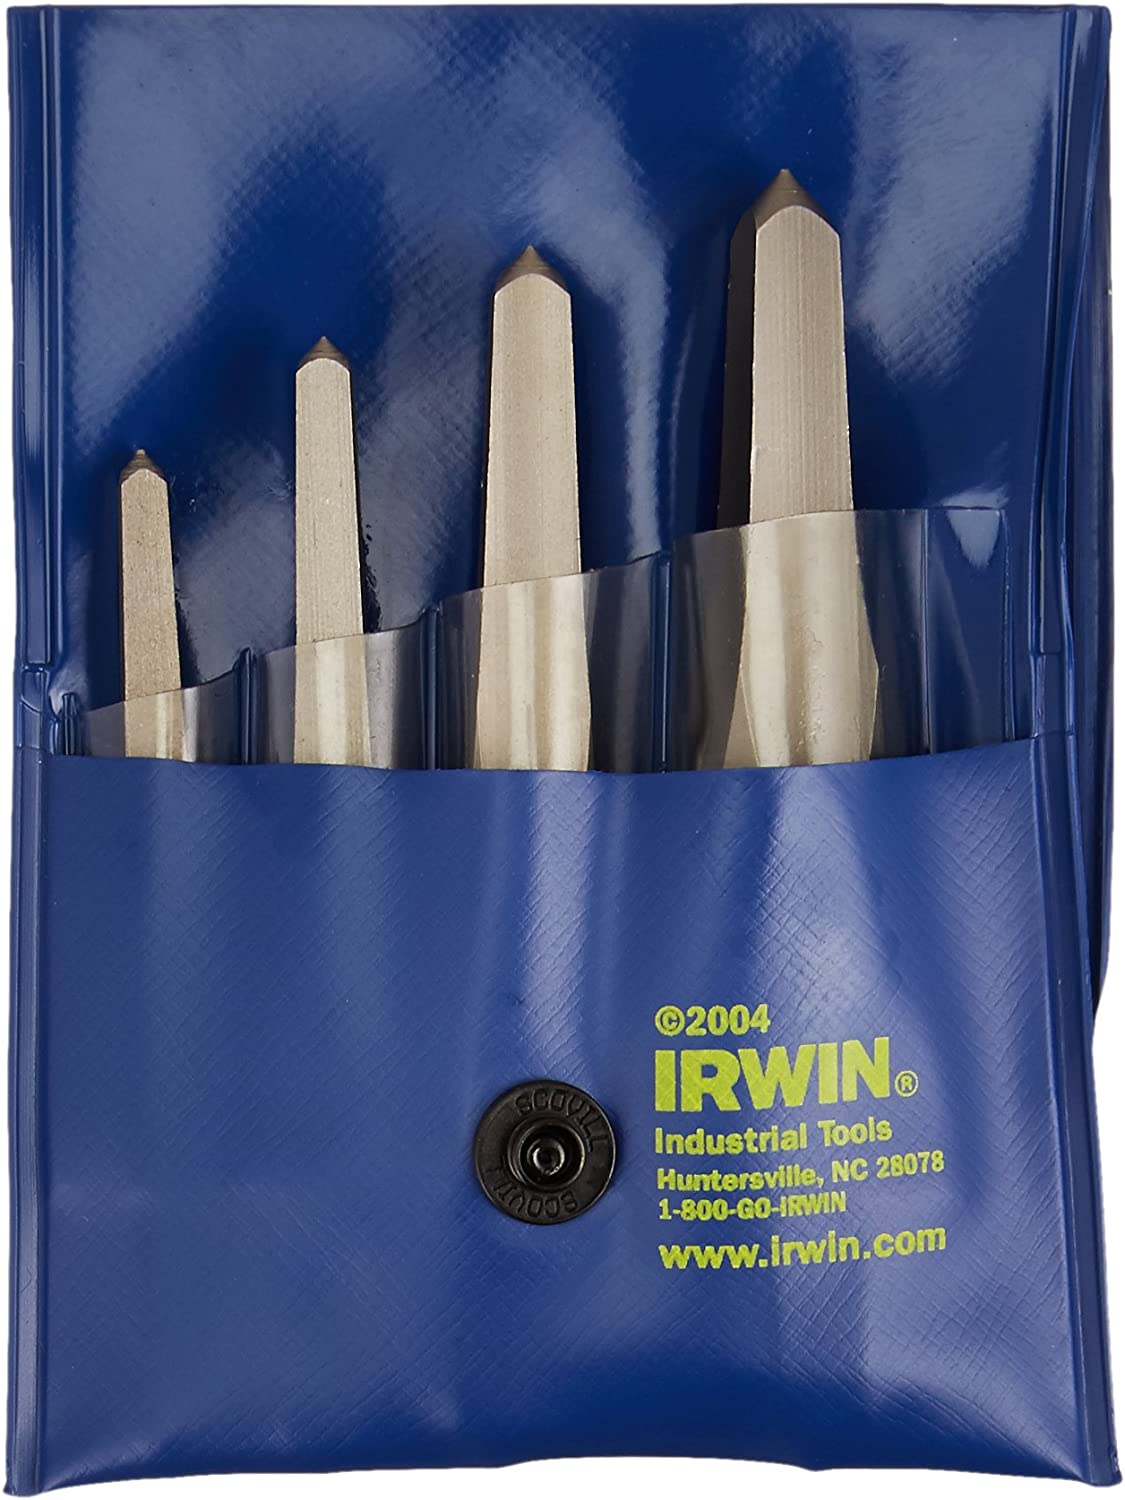 4 Pc. STRAIGHT FLUTE SCREW EXTRACTOR SET by IRWIN